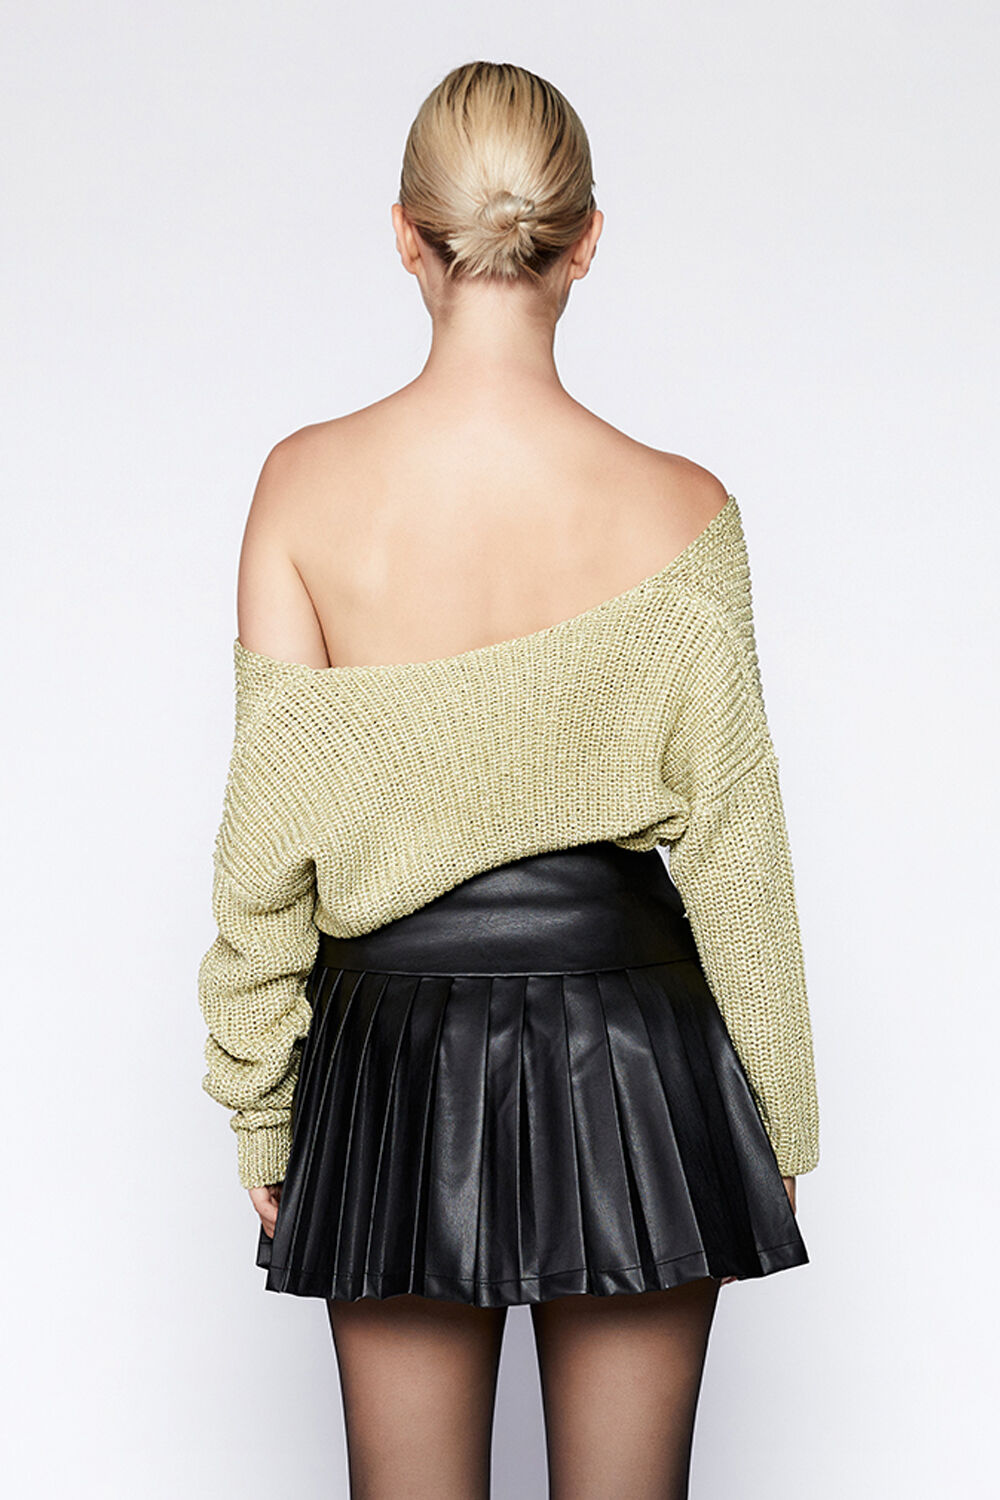 LUREX KNIT CARDI in colour GOLD EARTH